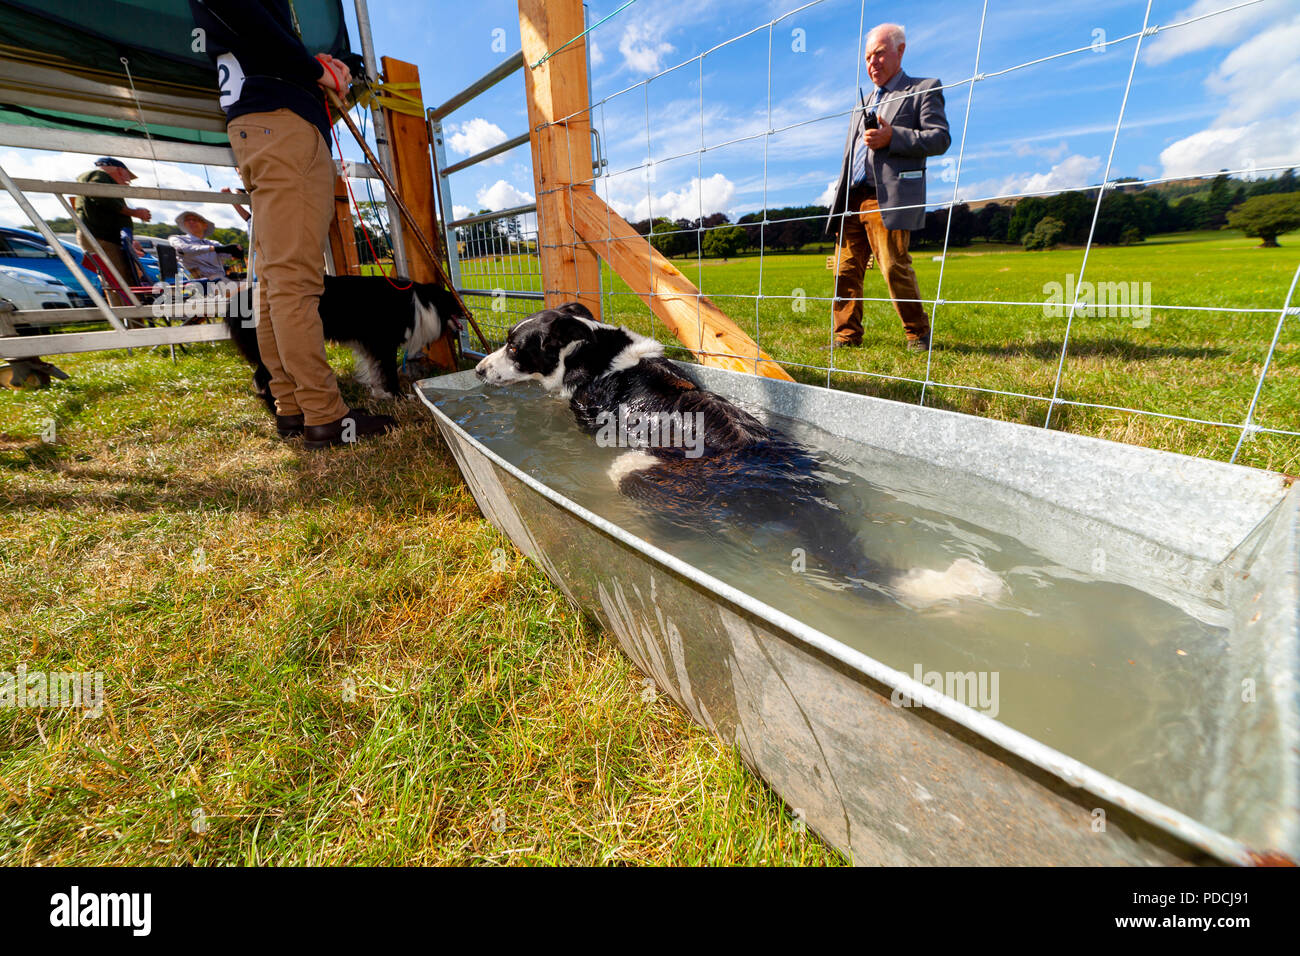 Nannerch, North Wales, UK Weather: Hot and sunny weather perfect for the Welsh National Sheep Dog Trials being held in the rural village of Nannerch at the Penbedw Estate in Flintshire. A sheep dog relaxing in the cold water provided for the dogs to cool down after competing at the National Sheep Dog Trials in the hot weather, Nannerch, Flintshire Stock Photo